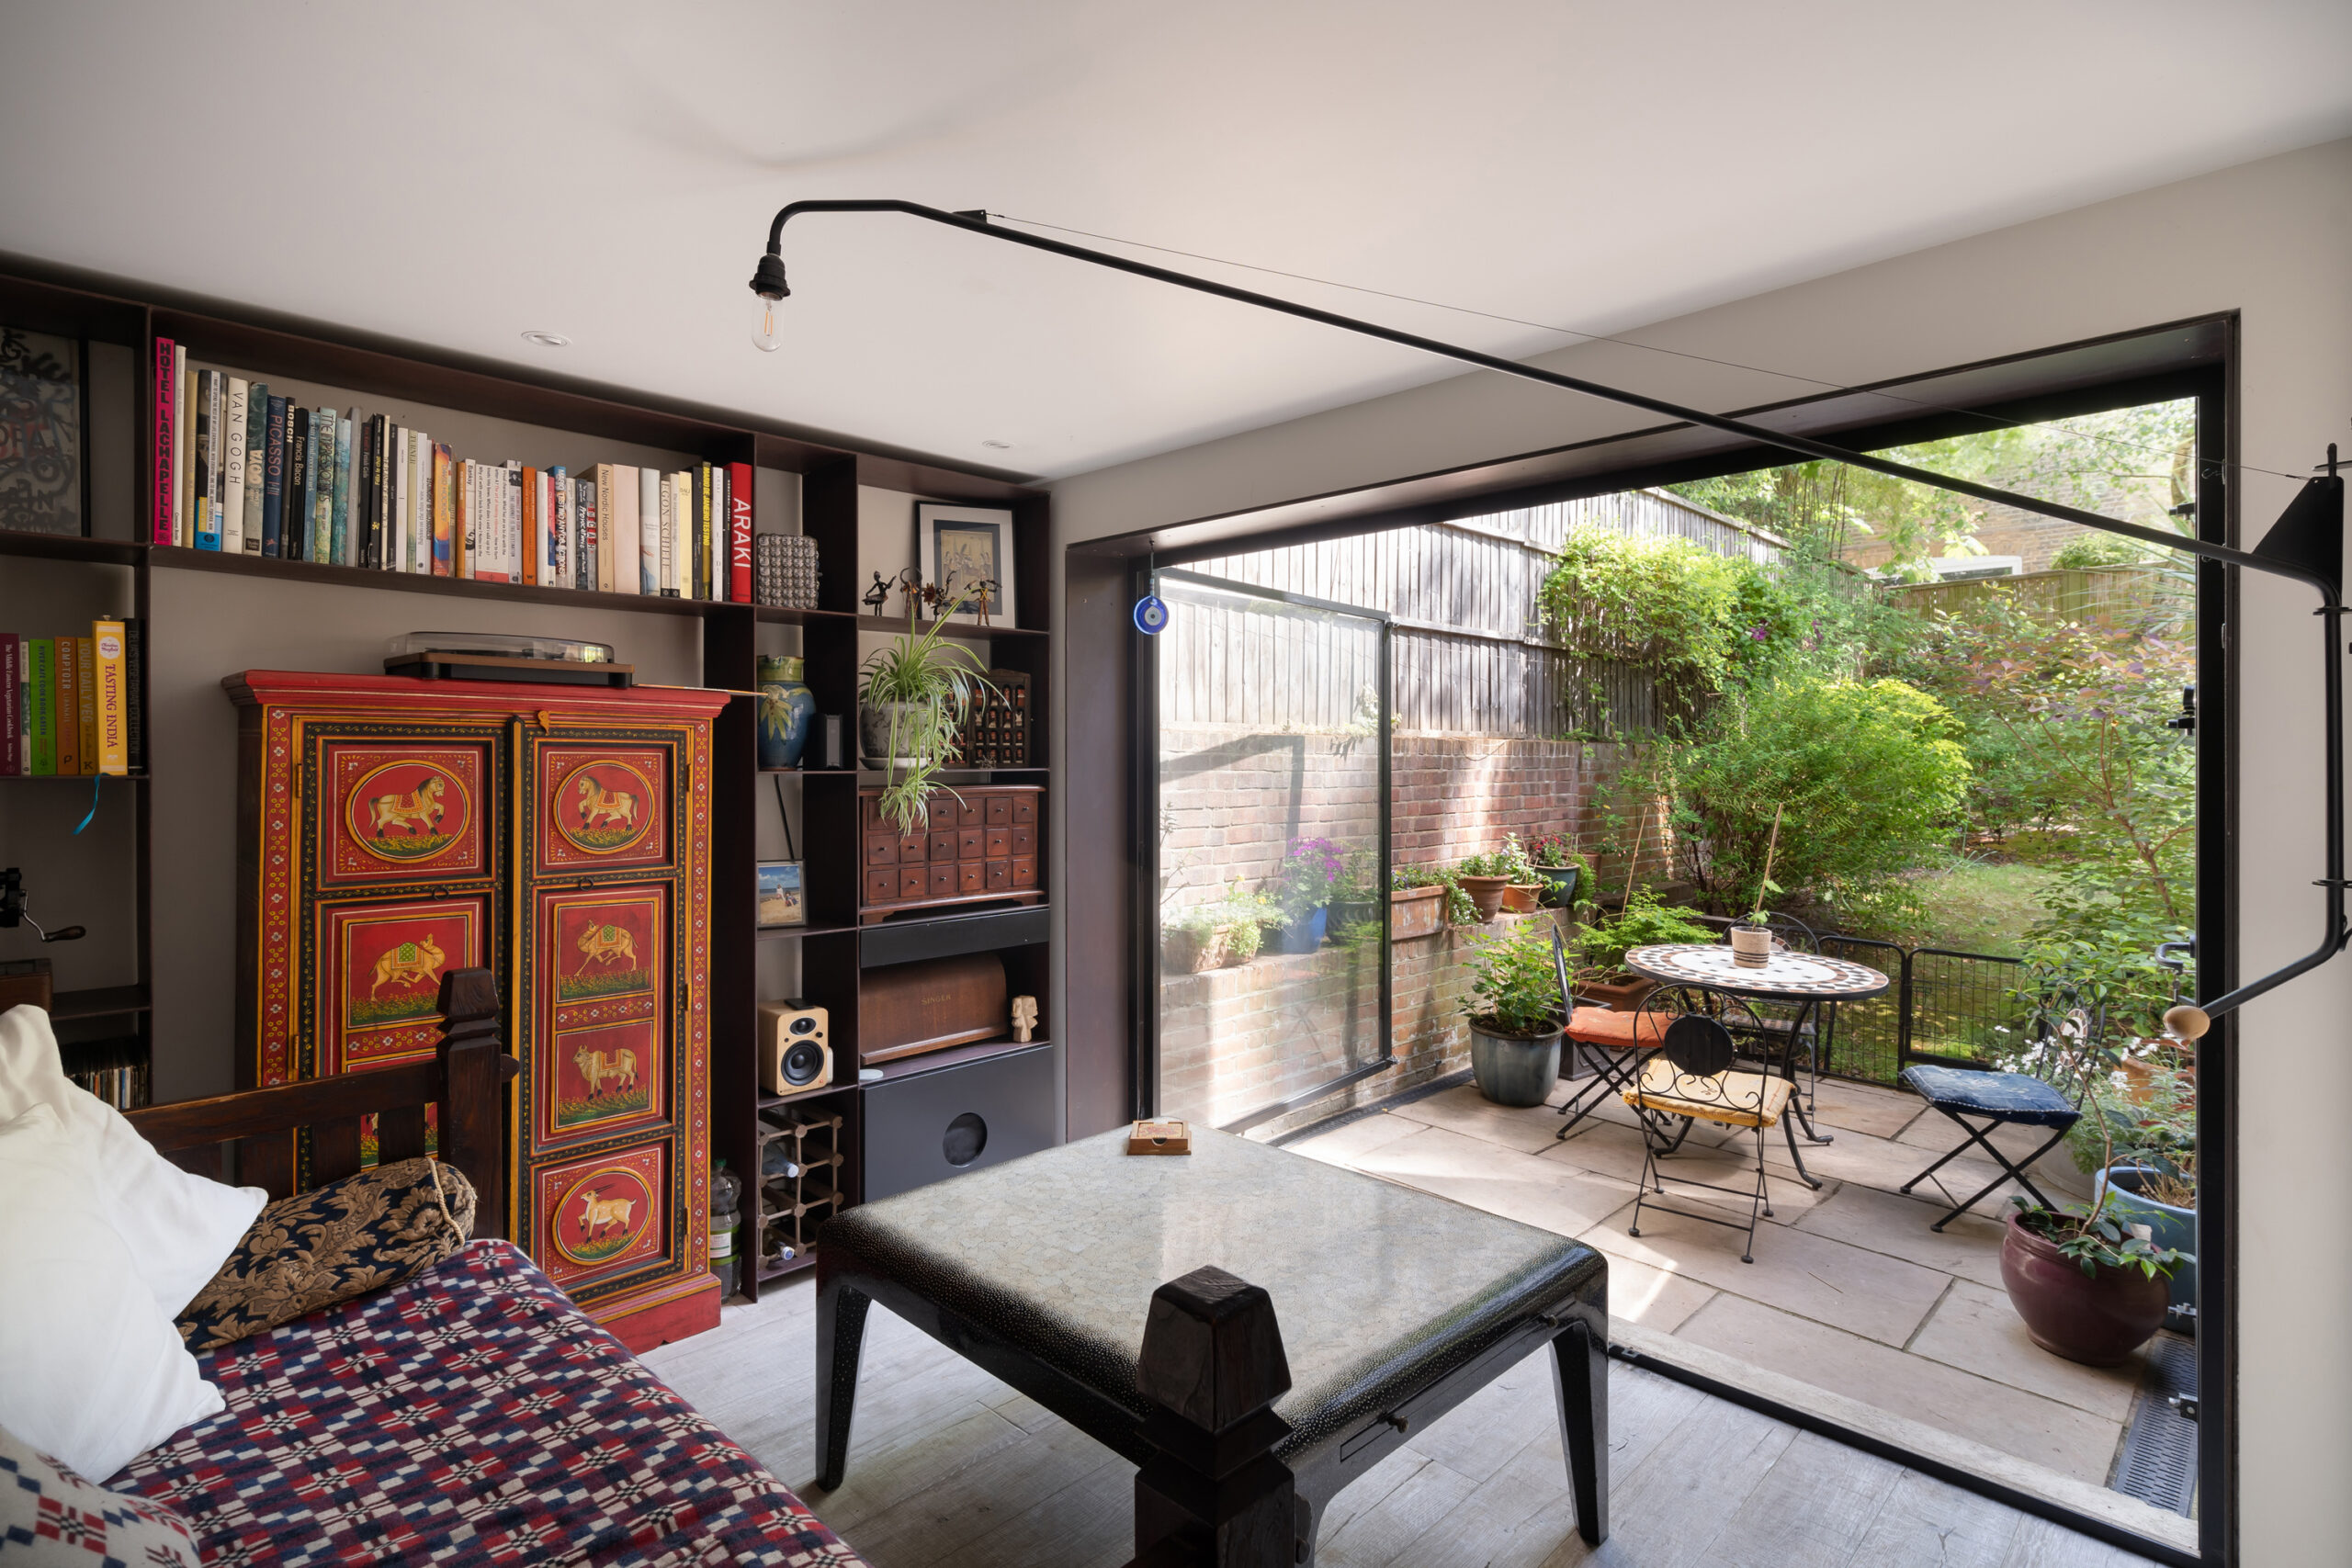 For Sale: Bassett Road North Kensington W10 glass doors that open onto the private garden